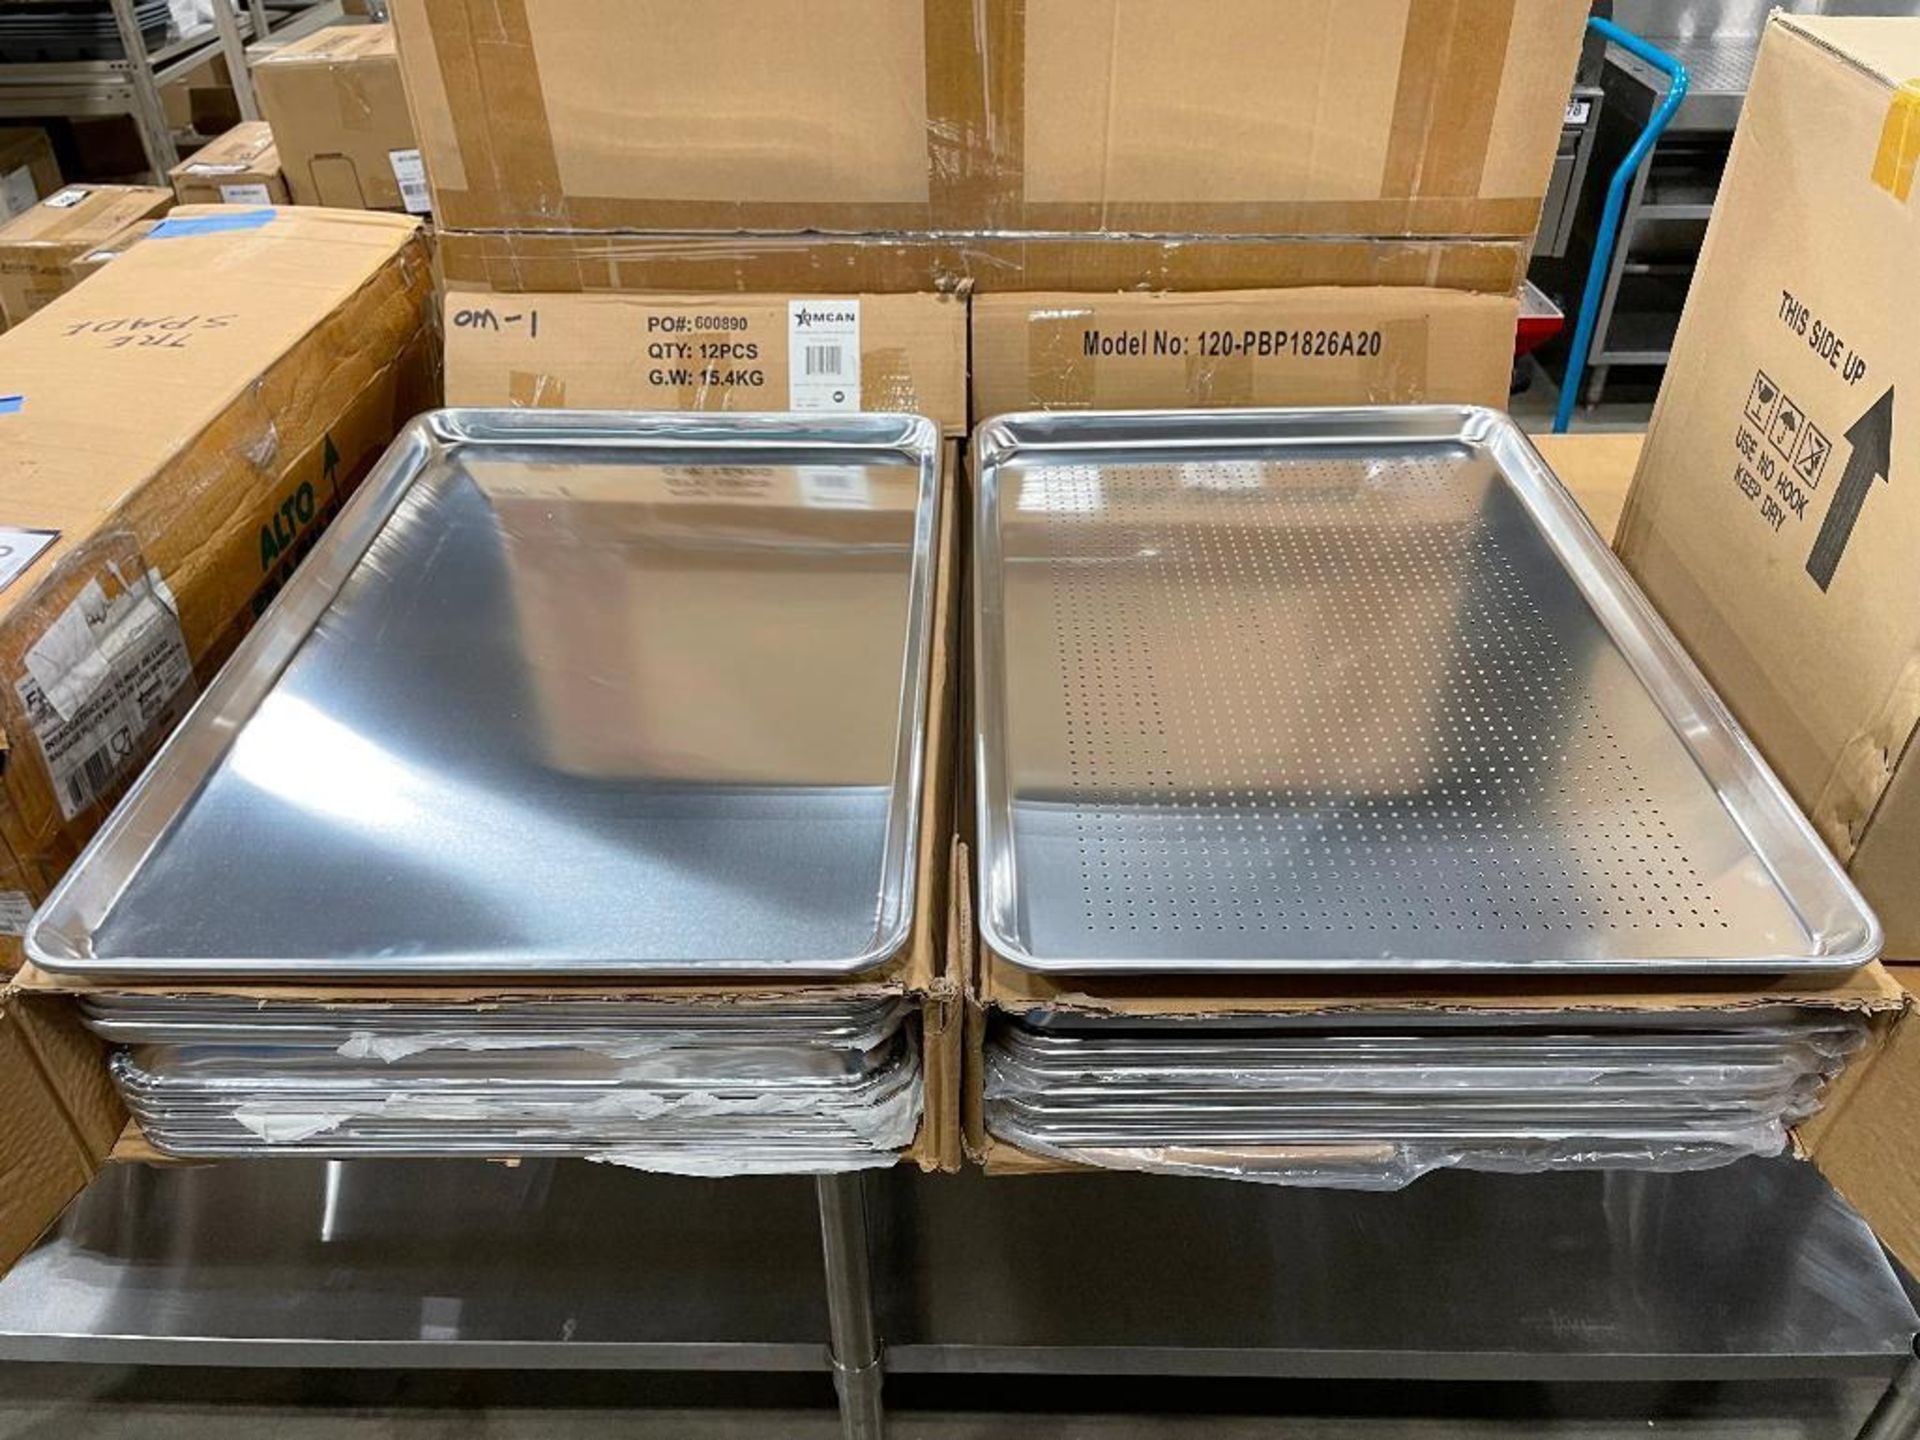 CASE OF FULL SIZE BUN PANS & CASE OF FULL SIZE PERFORATED BUN PANS, LOT OF 24. - NEW - Image 2 of 10